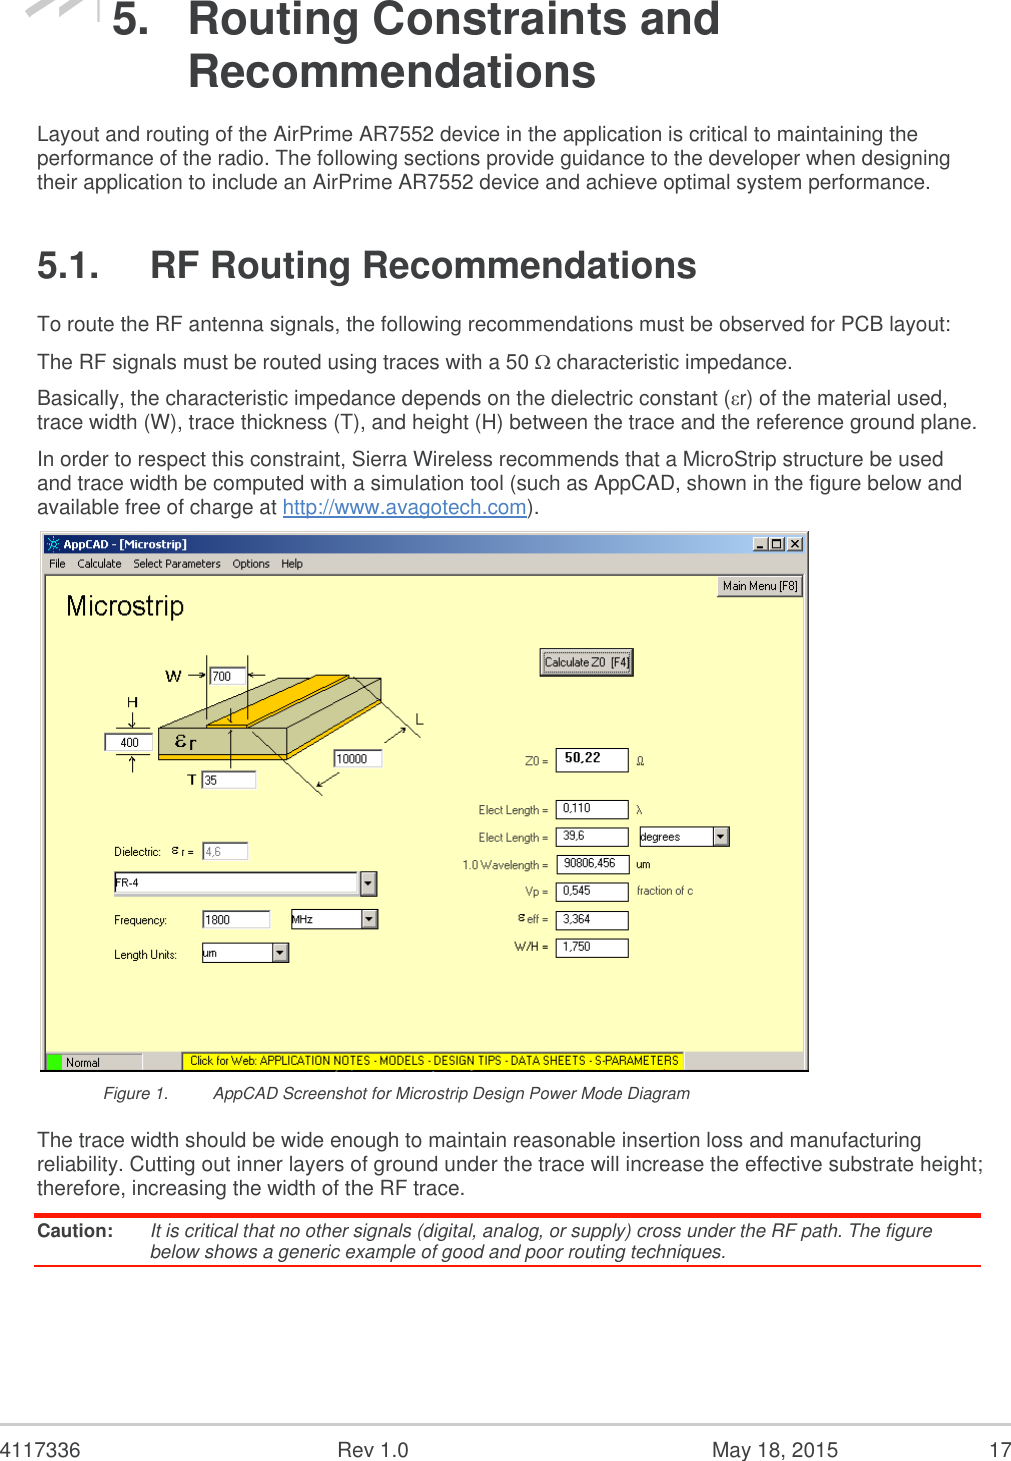  4117336  Rev 1.0  May 18, 2015  17 5.  Routing Constraints and Recommendations Layout and routing of the AirPrime AR7552 device in the application is critical to maintaining the performance of the radio. The following sections provide guidance to the developer when designing their application to include an AirPrime AR7552 device and achieve optimal system performance. 5.1.  RF Routing Recommendations To route the RF antenna signals, the following recommendations must be observed for PCB layout: The RF signals must be routed using traces with a 50  characteristic impedance. Basically, the characteristic impedance depends on the dielectric constant (εr) of the material used, trace width (W), trace thickness (T), and height (H) between the trace and the reference ground plane. In order to respect this constraint, Sierra Wireless recommends that a MicroStrip structure be used and trace width be computed with a simulation tool (such as AppCAD, shown in the figure below and available free of charge at http://www.avagotech.com).  Figure 1.  AppCAD Screenshot for Microstrip Design Power Mode Diagram The trace width should be wide enough to maintain reasonable insertion loss and manufacturing reliability. Cutting out inner layers of ground under the trace will increase the effective substrate height; therefore, increasing the width of the RF trace. Caution:  It is critical that no other signals (digital, analog, or supply) cross under the RF path. The figure below shows a generic example of good and poor routing techniques. 